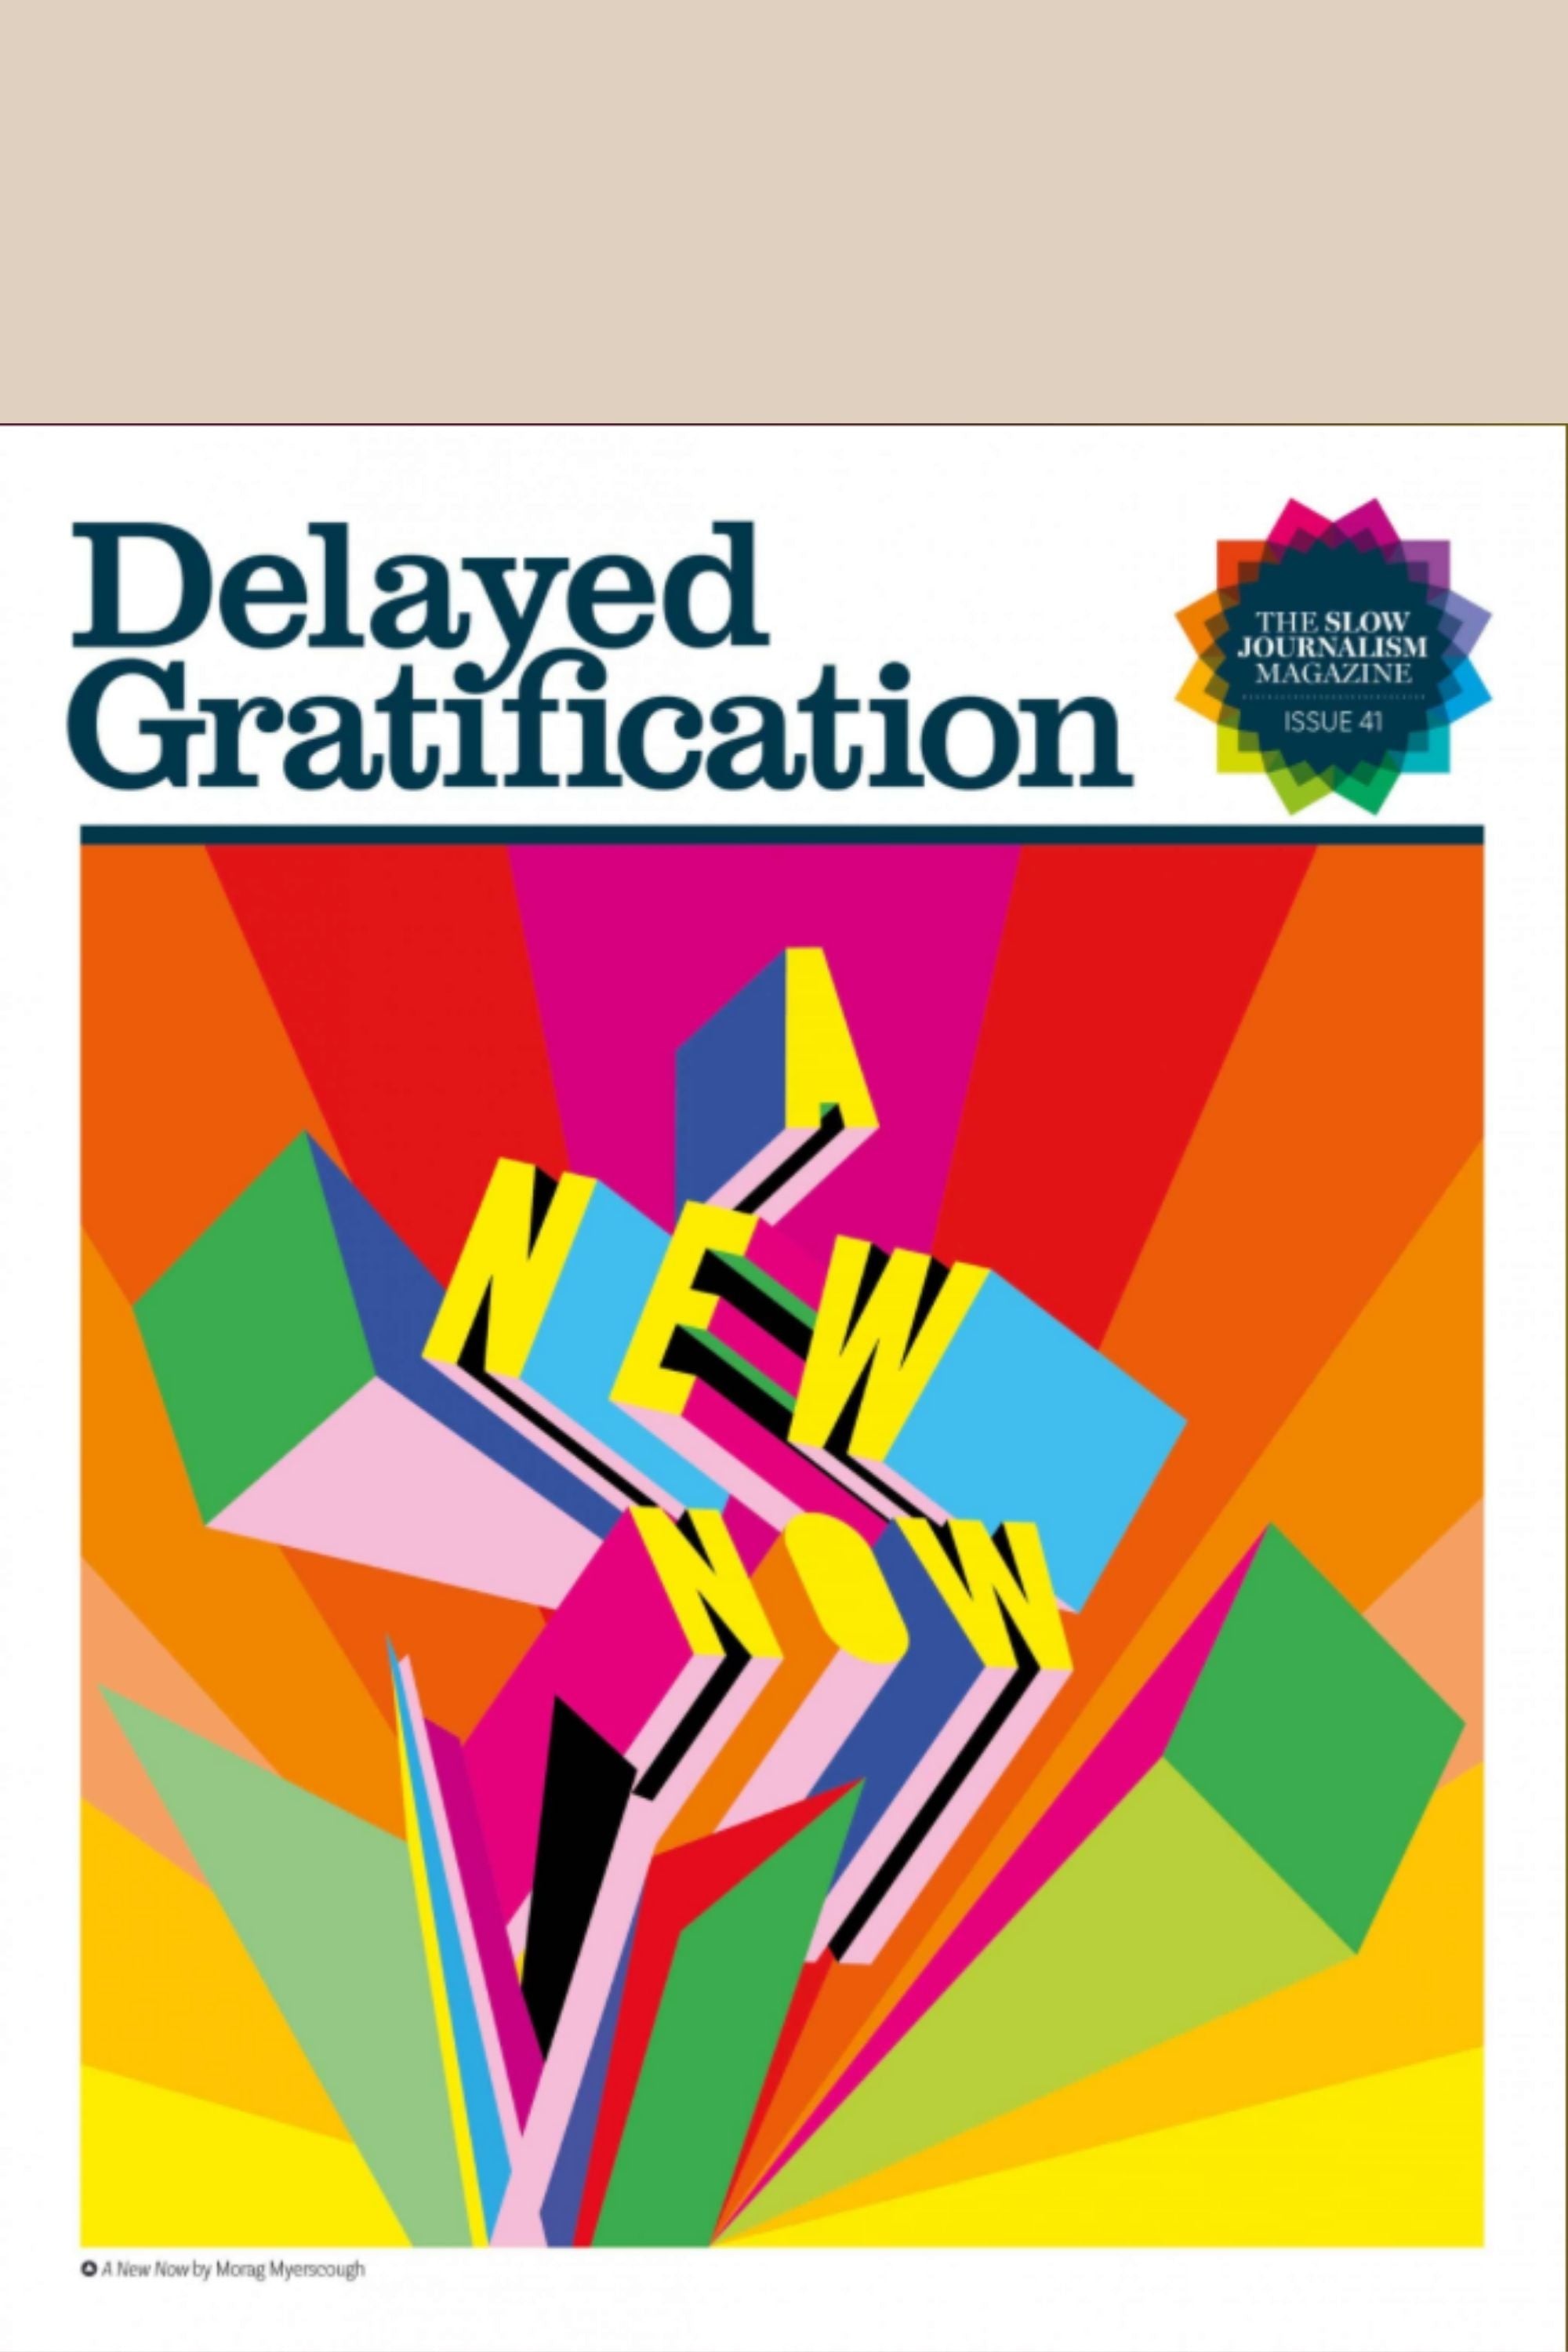 Delayed Gratification Issue 41 Front cover 'A new now'